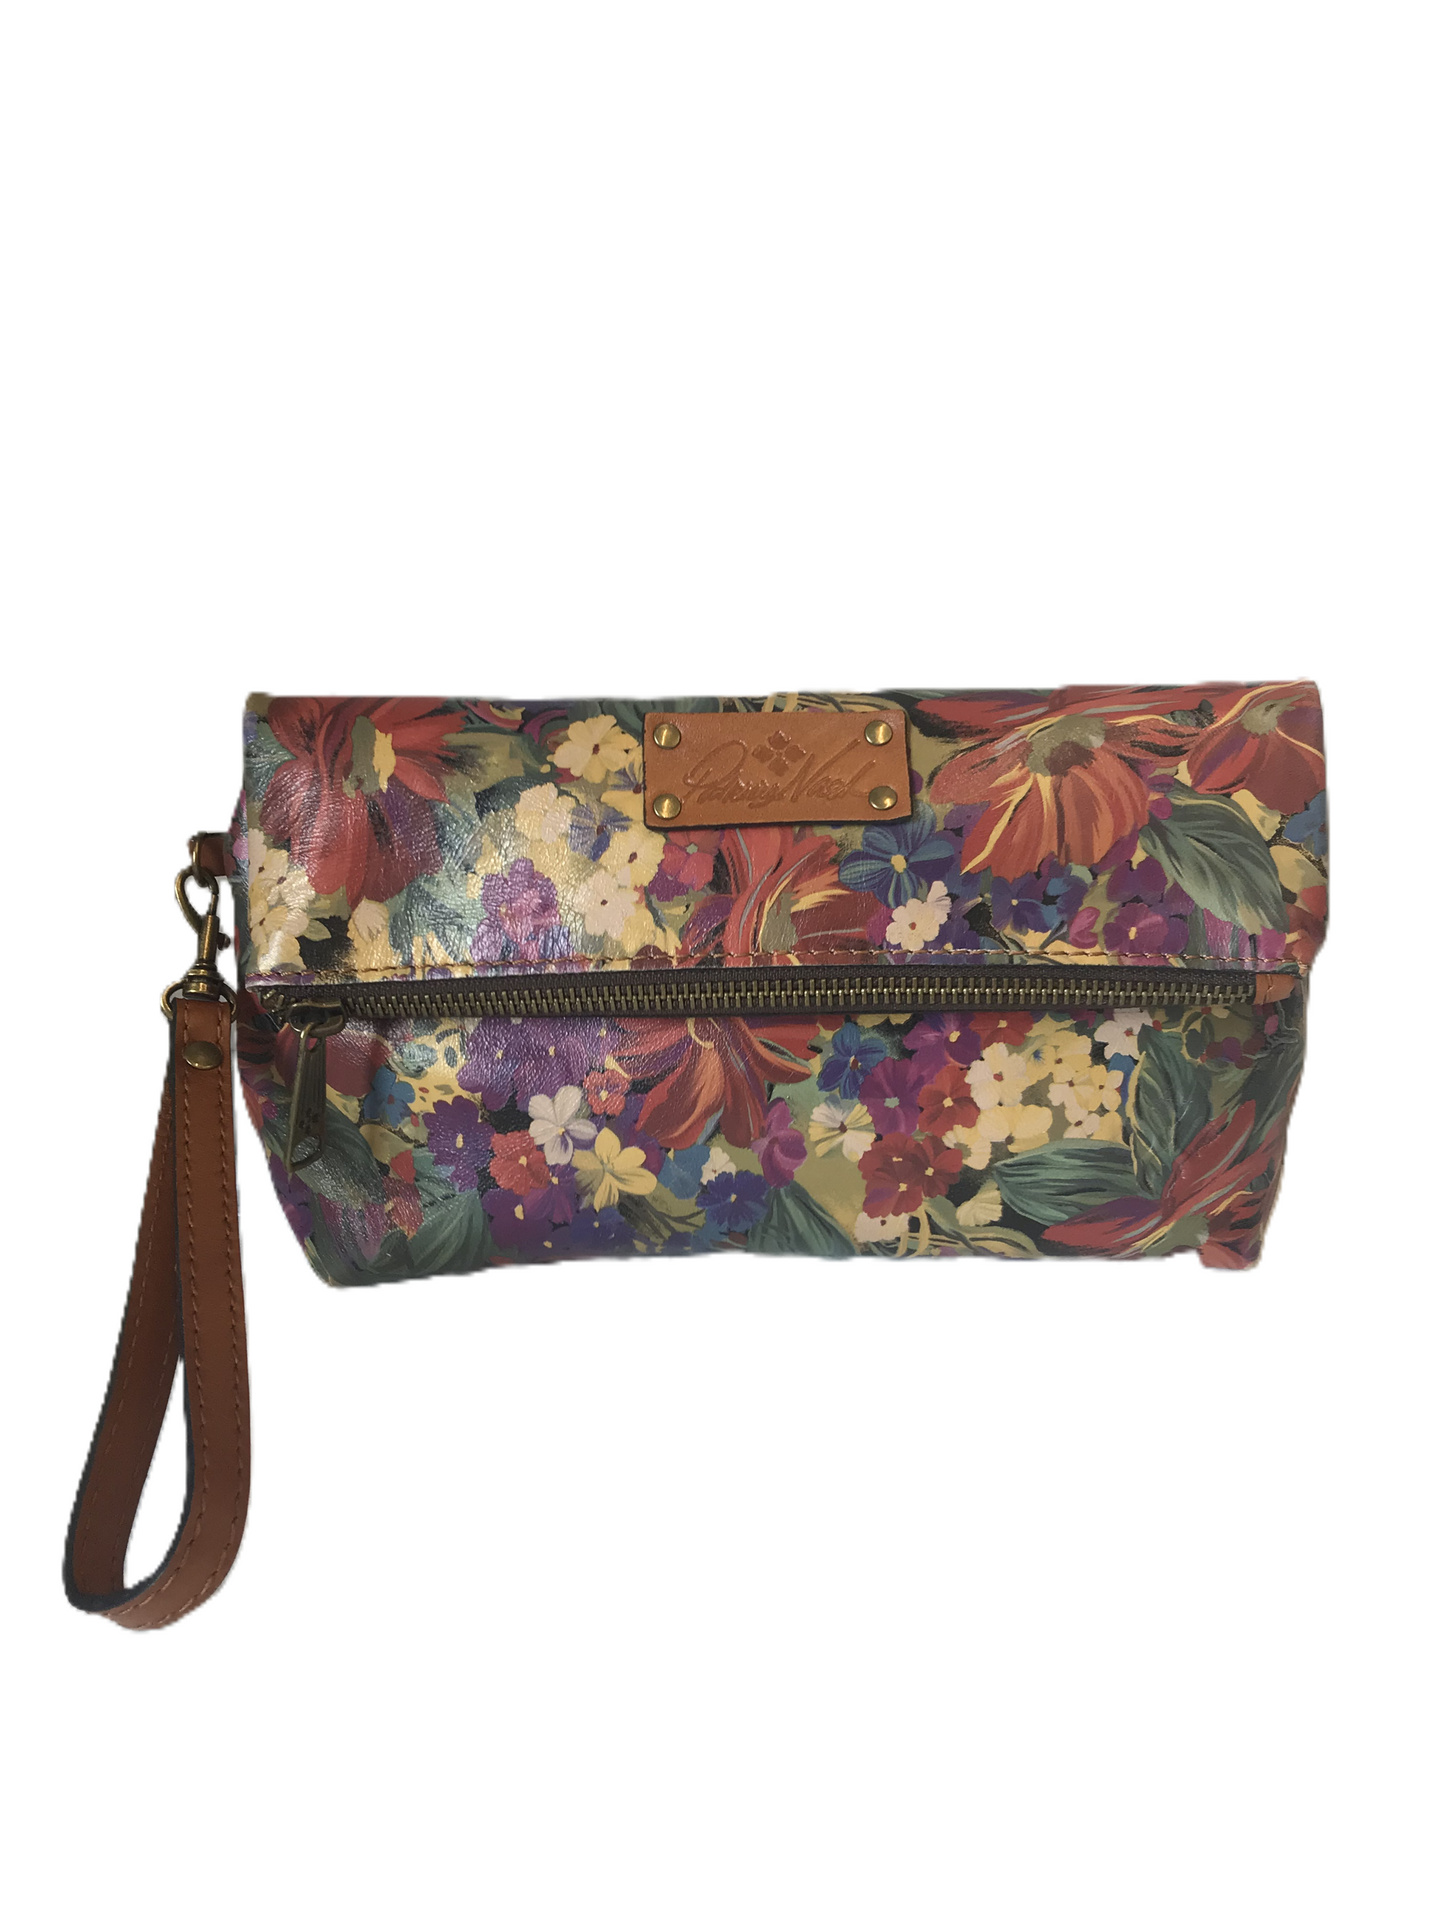 Wristlet By Patricia Nash, Size: Small